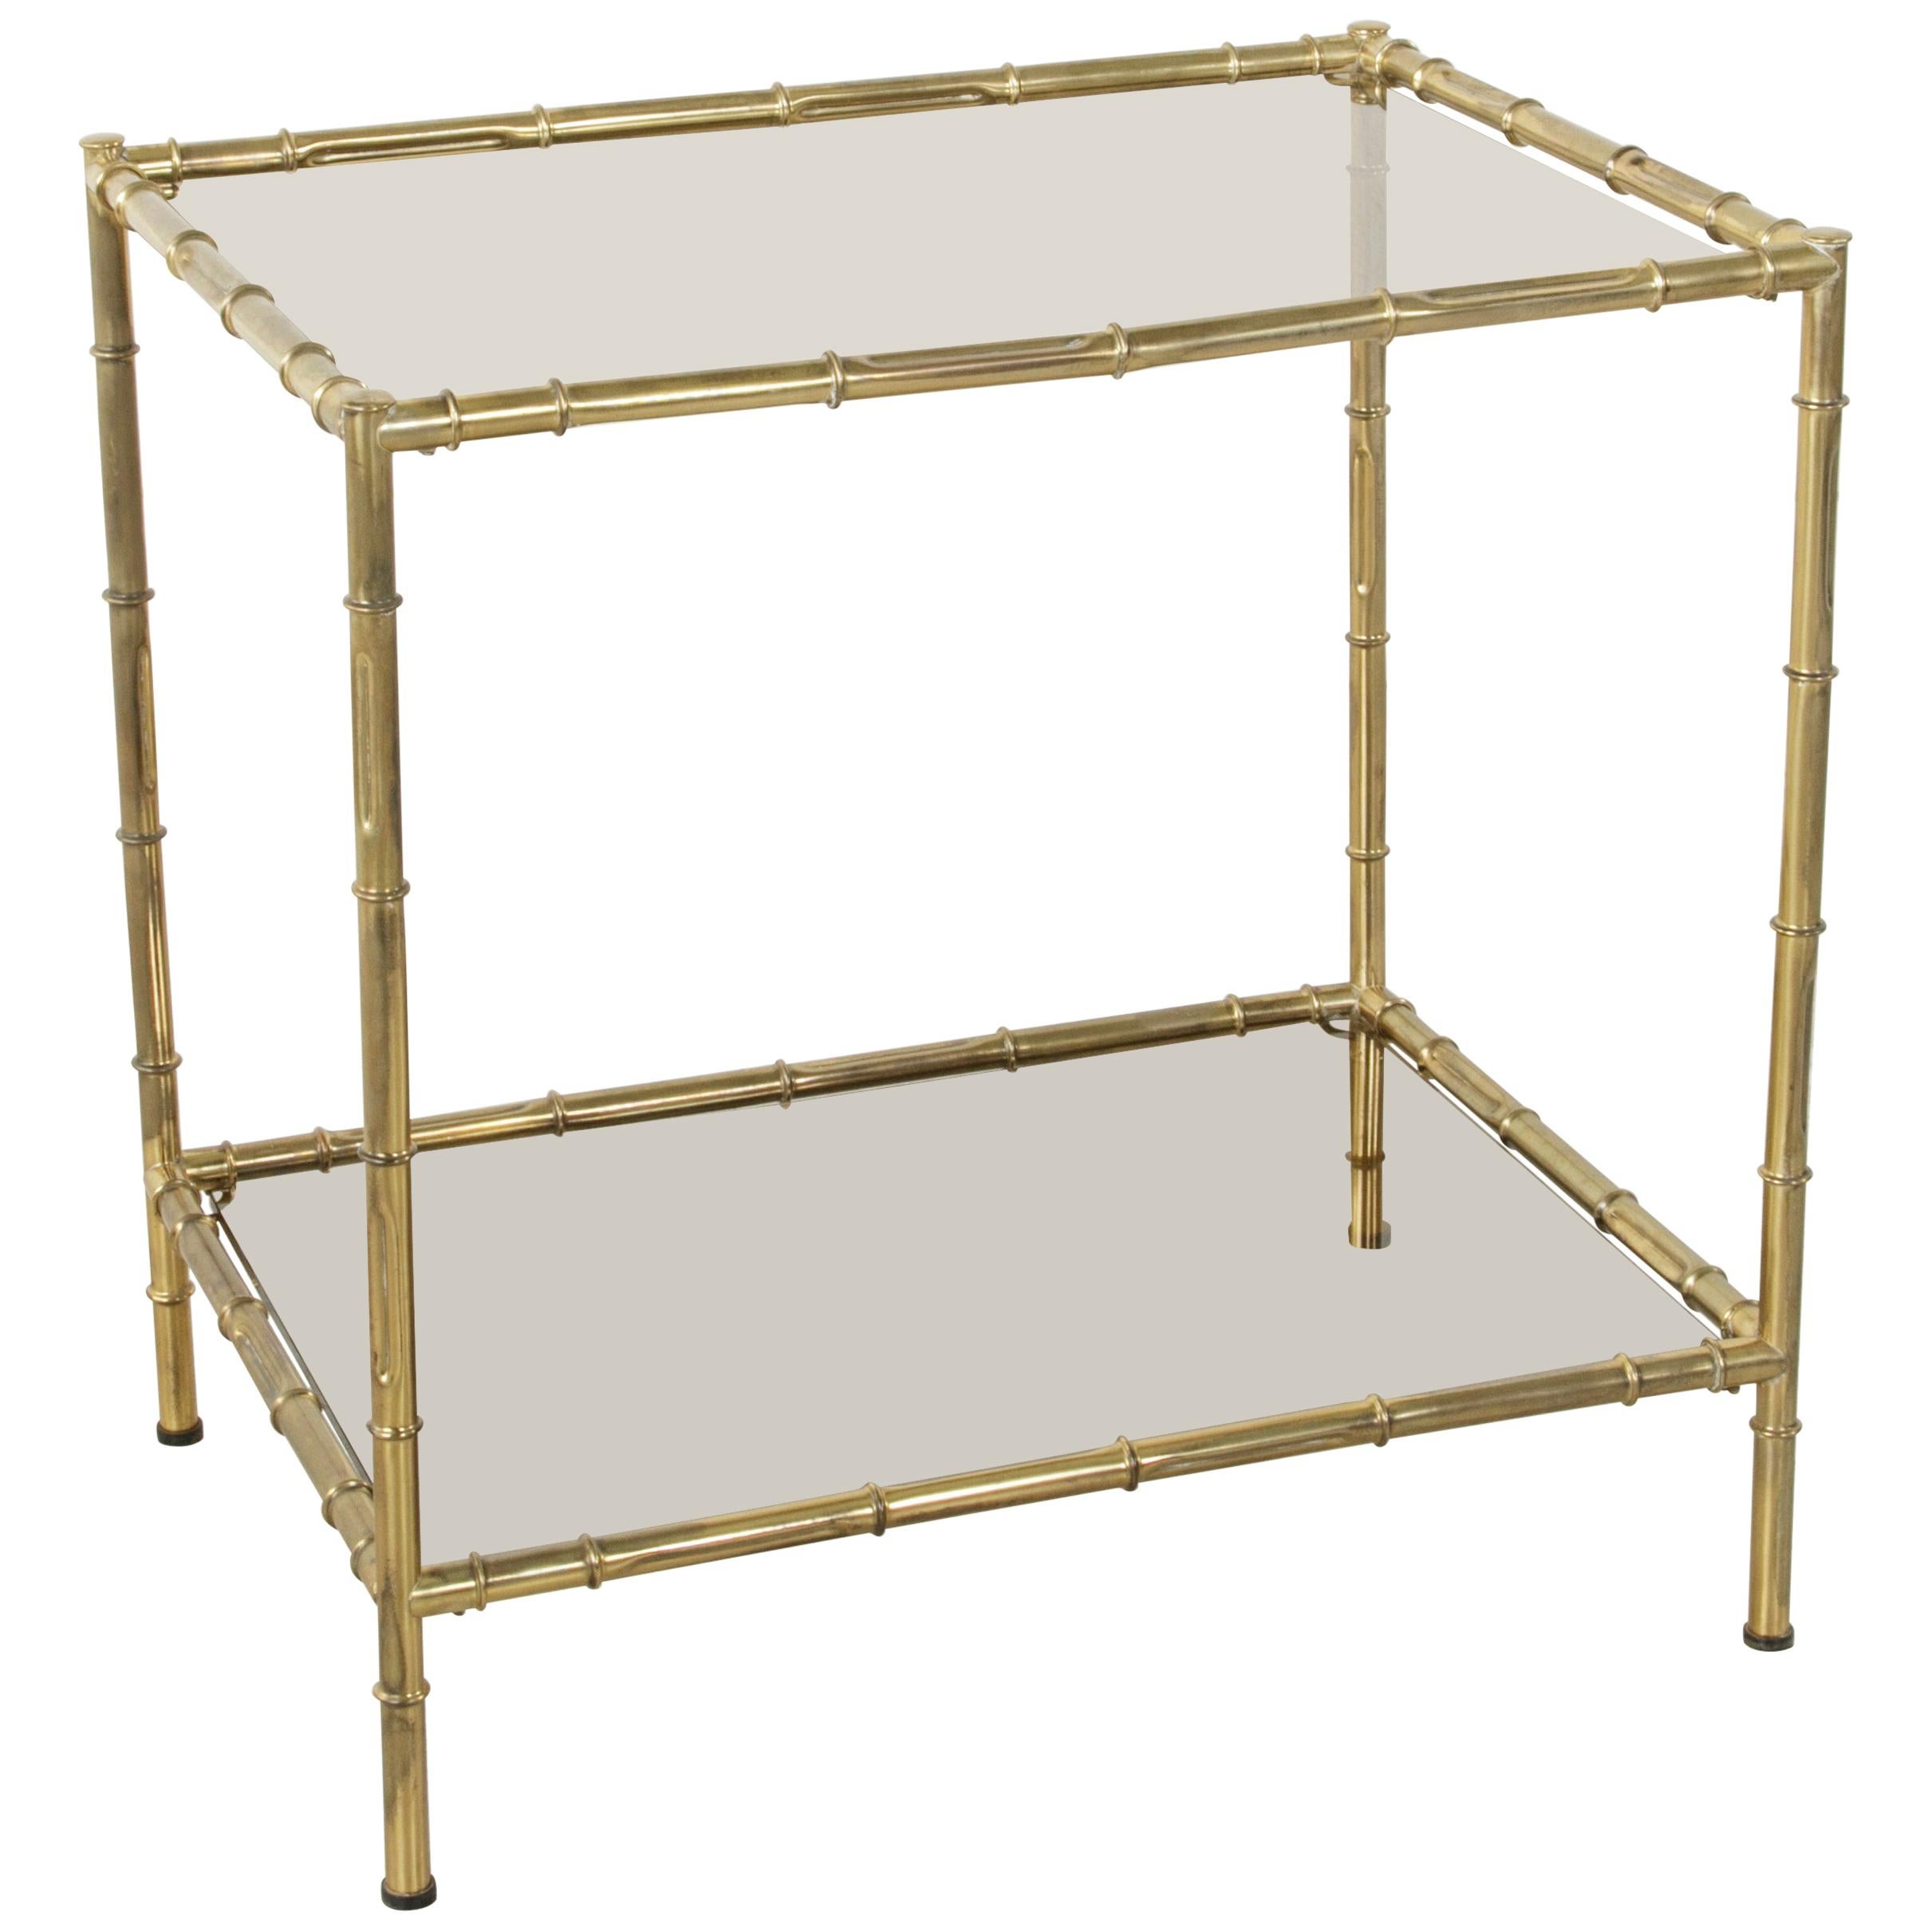 French Midcentury Faux Bamboo Brass Side Table with Smoked Glass Shelves